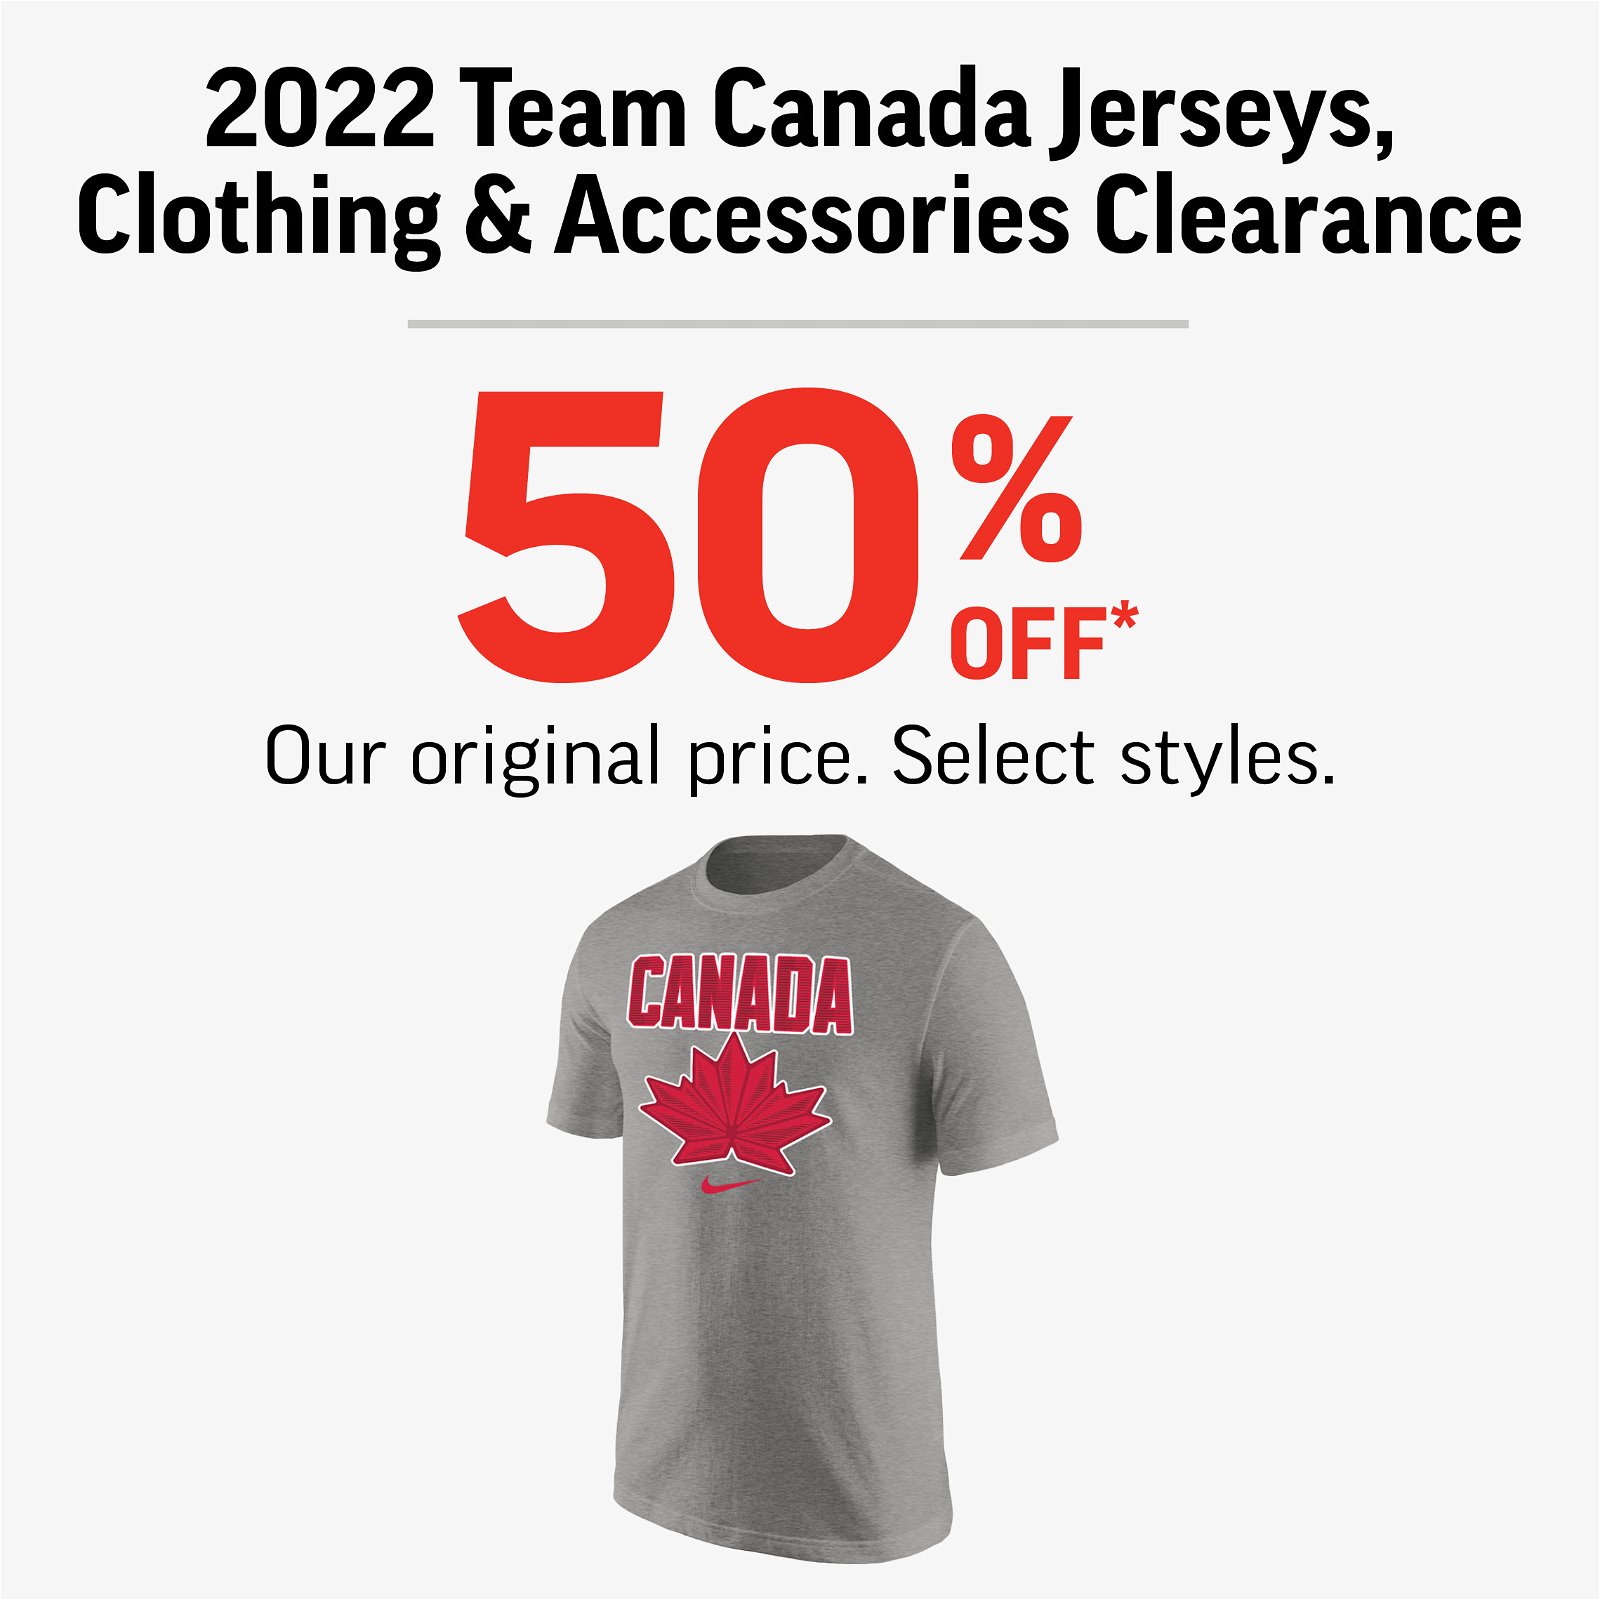 2022 TEAM CANADA JERSEYS, CLOTHING & ACCESSORIES CLEARANCE 50% OFF 